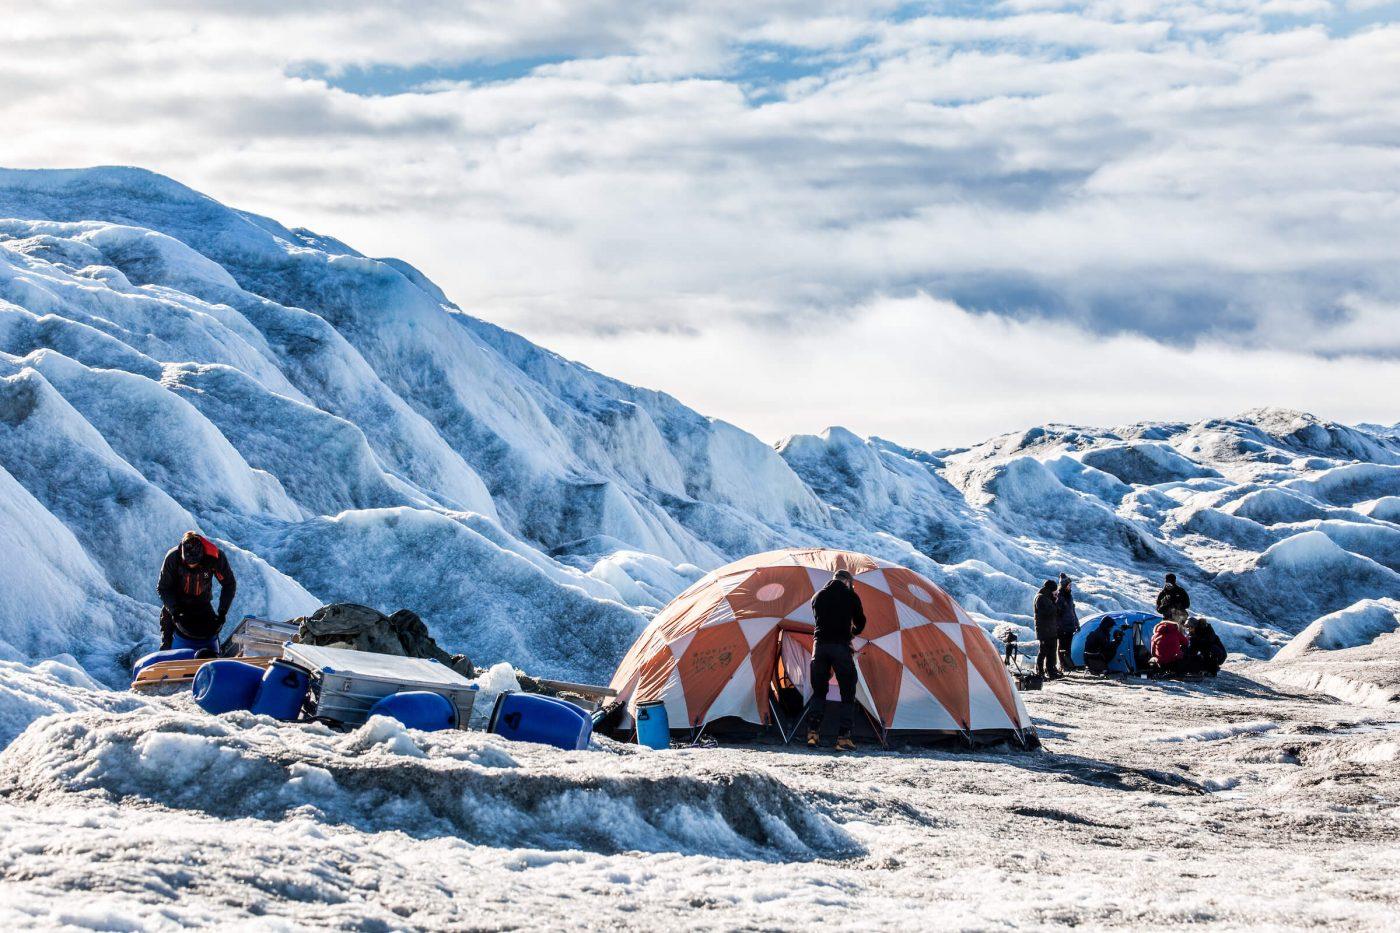 Adventurers settling in at Camp Ice Cap on the Greenland Ice Sheet, run by Albatros Arctic Circle in Kangerlussuaq. By Raven Eye Photography - Visit Greenland